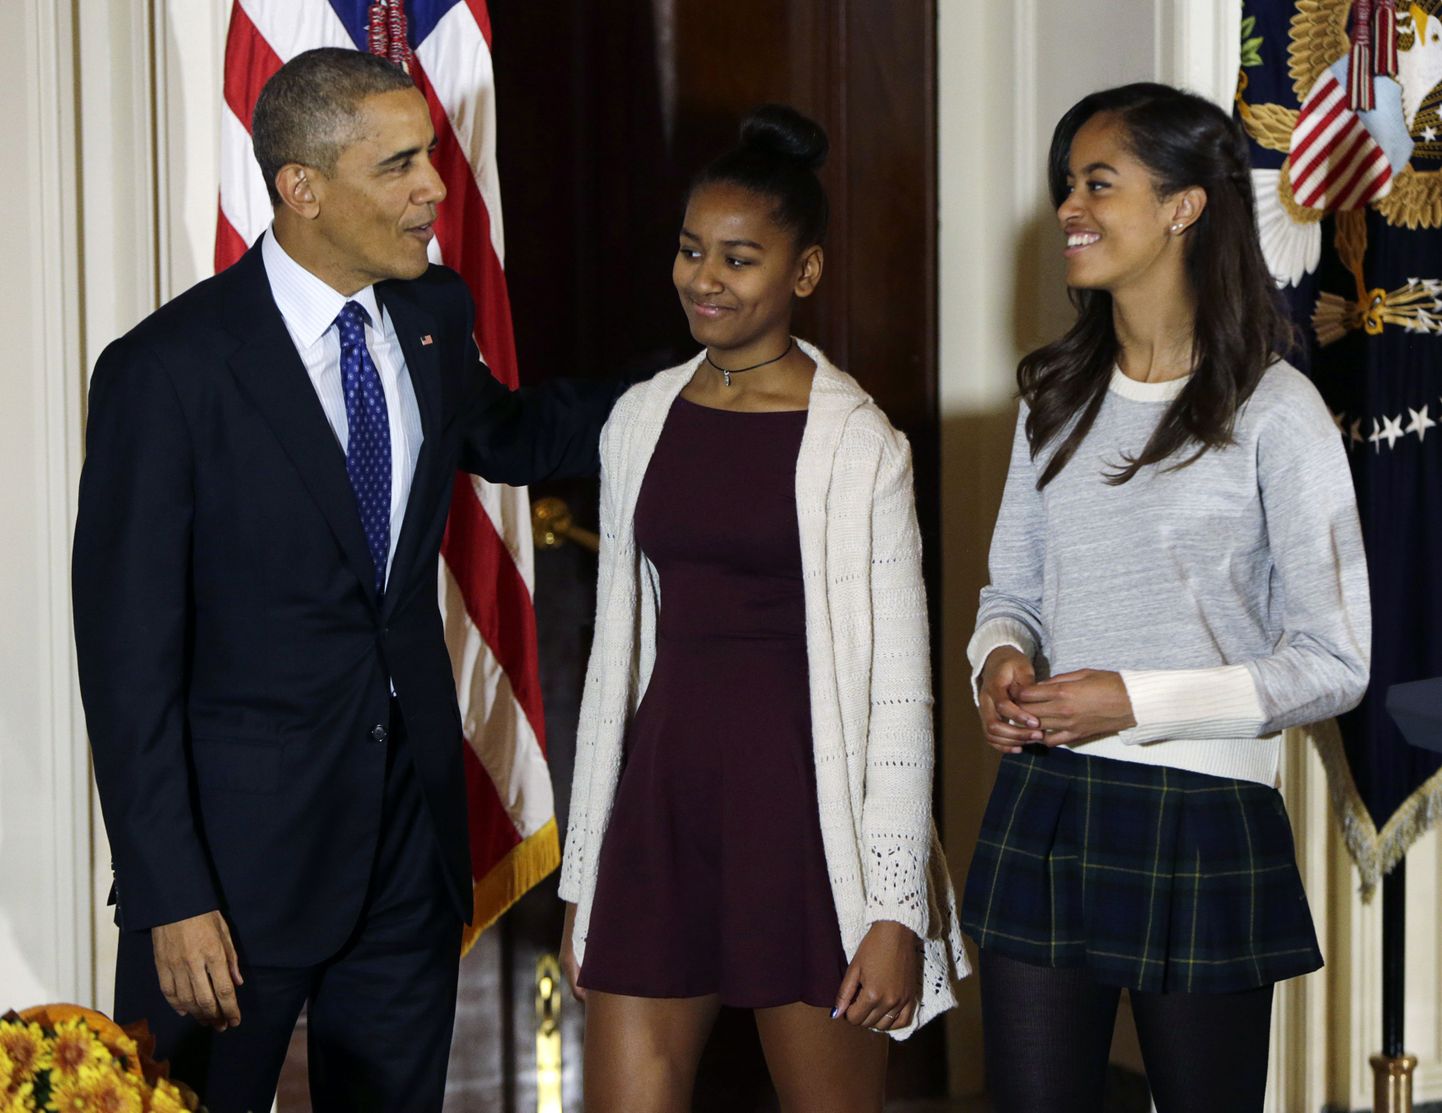 U.S. President Barack Obama's daughters Sasha and Malia (R) join their father after the pardoning of the National Thanksgiving Turkey "Cheese" at the White House in Washington November 26, 2014. REUTERS/Gary Cameron    (UNITED STATES - Tags: POLITICS SOCIETY)